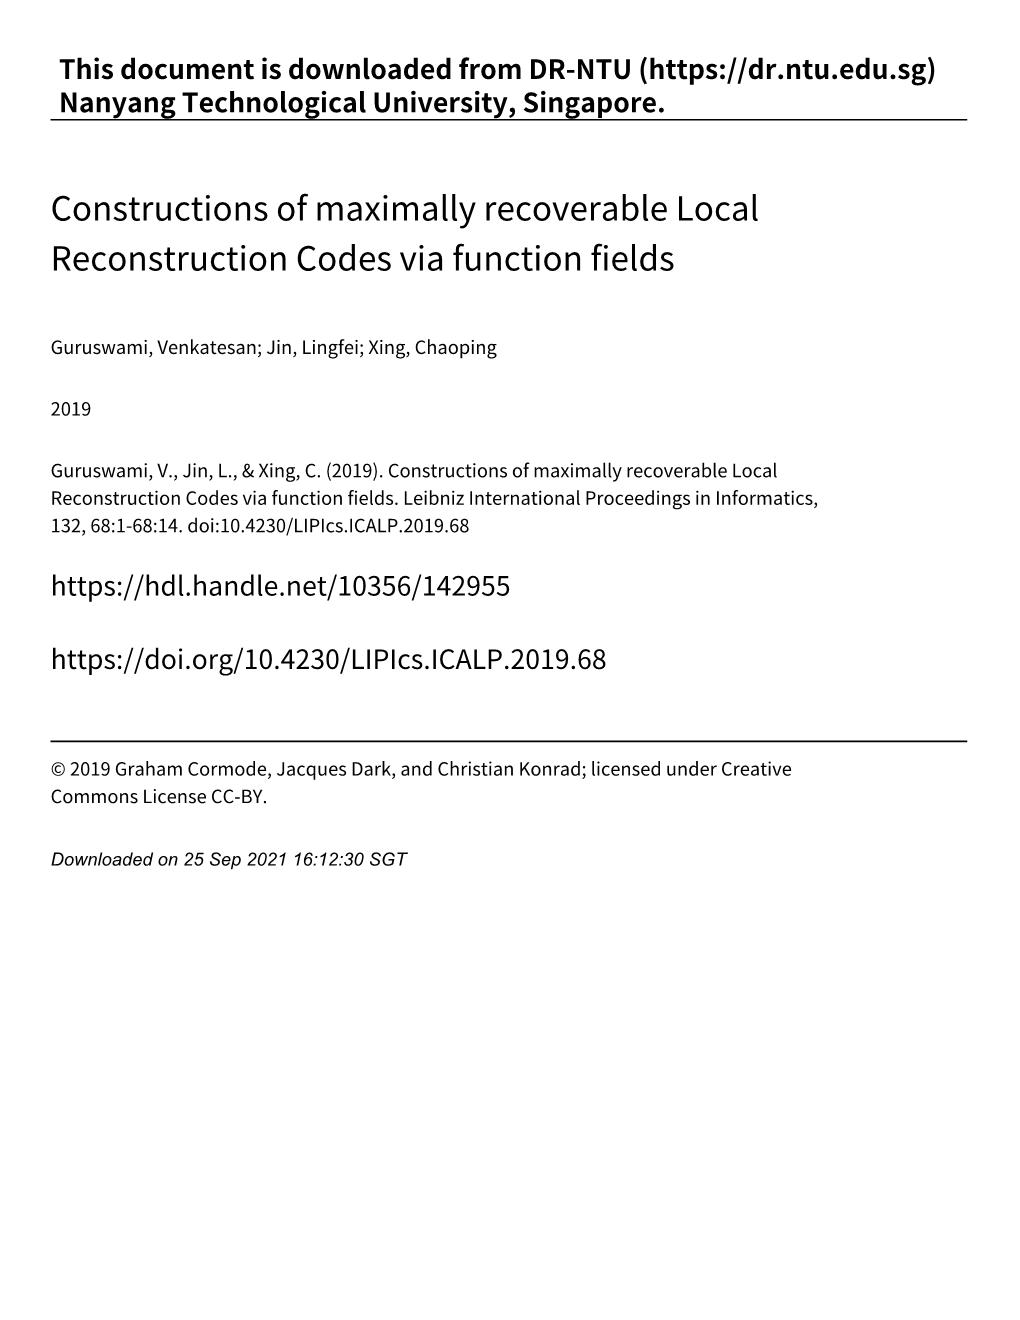 Constructions of Maximally Recoverable Local Reconstruction Codes Via Function Fields